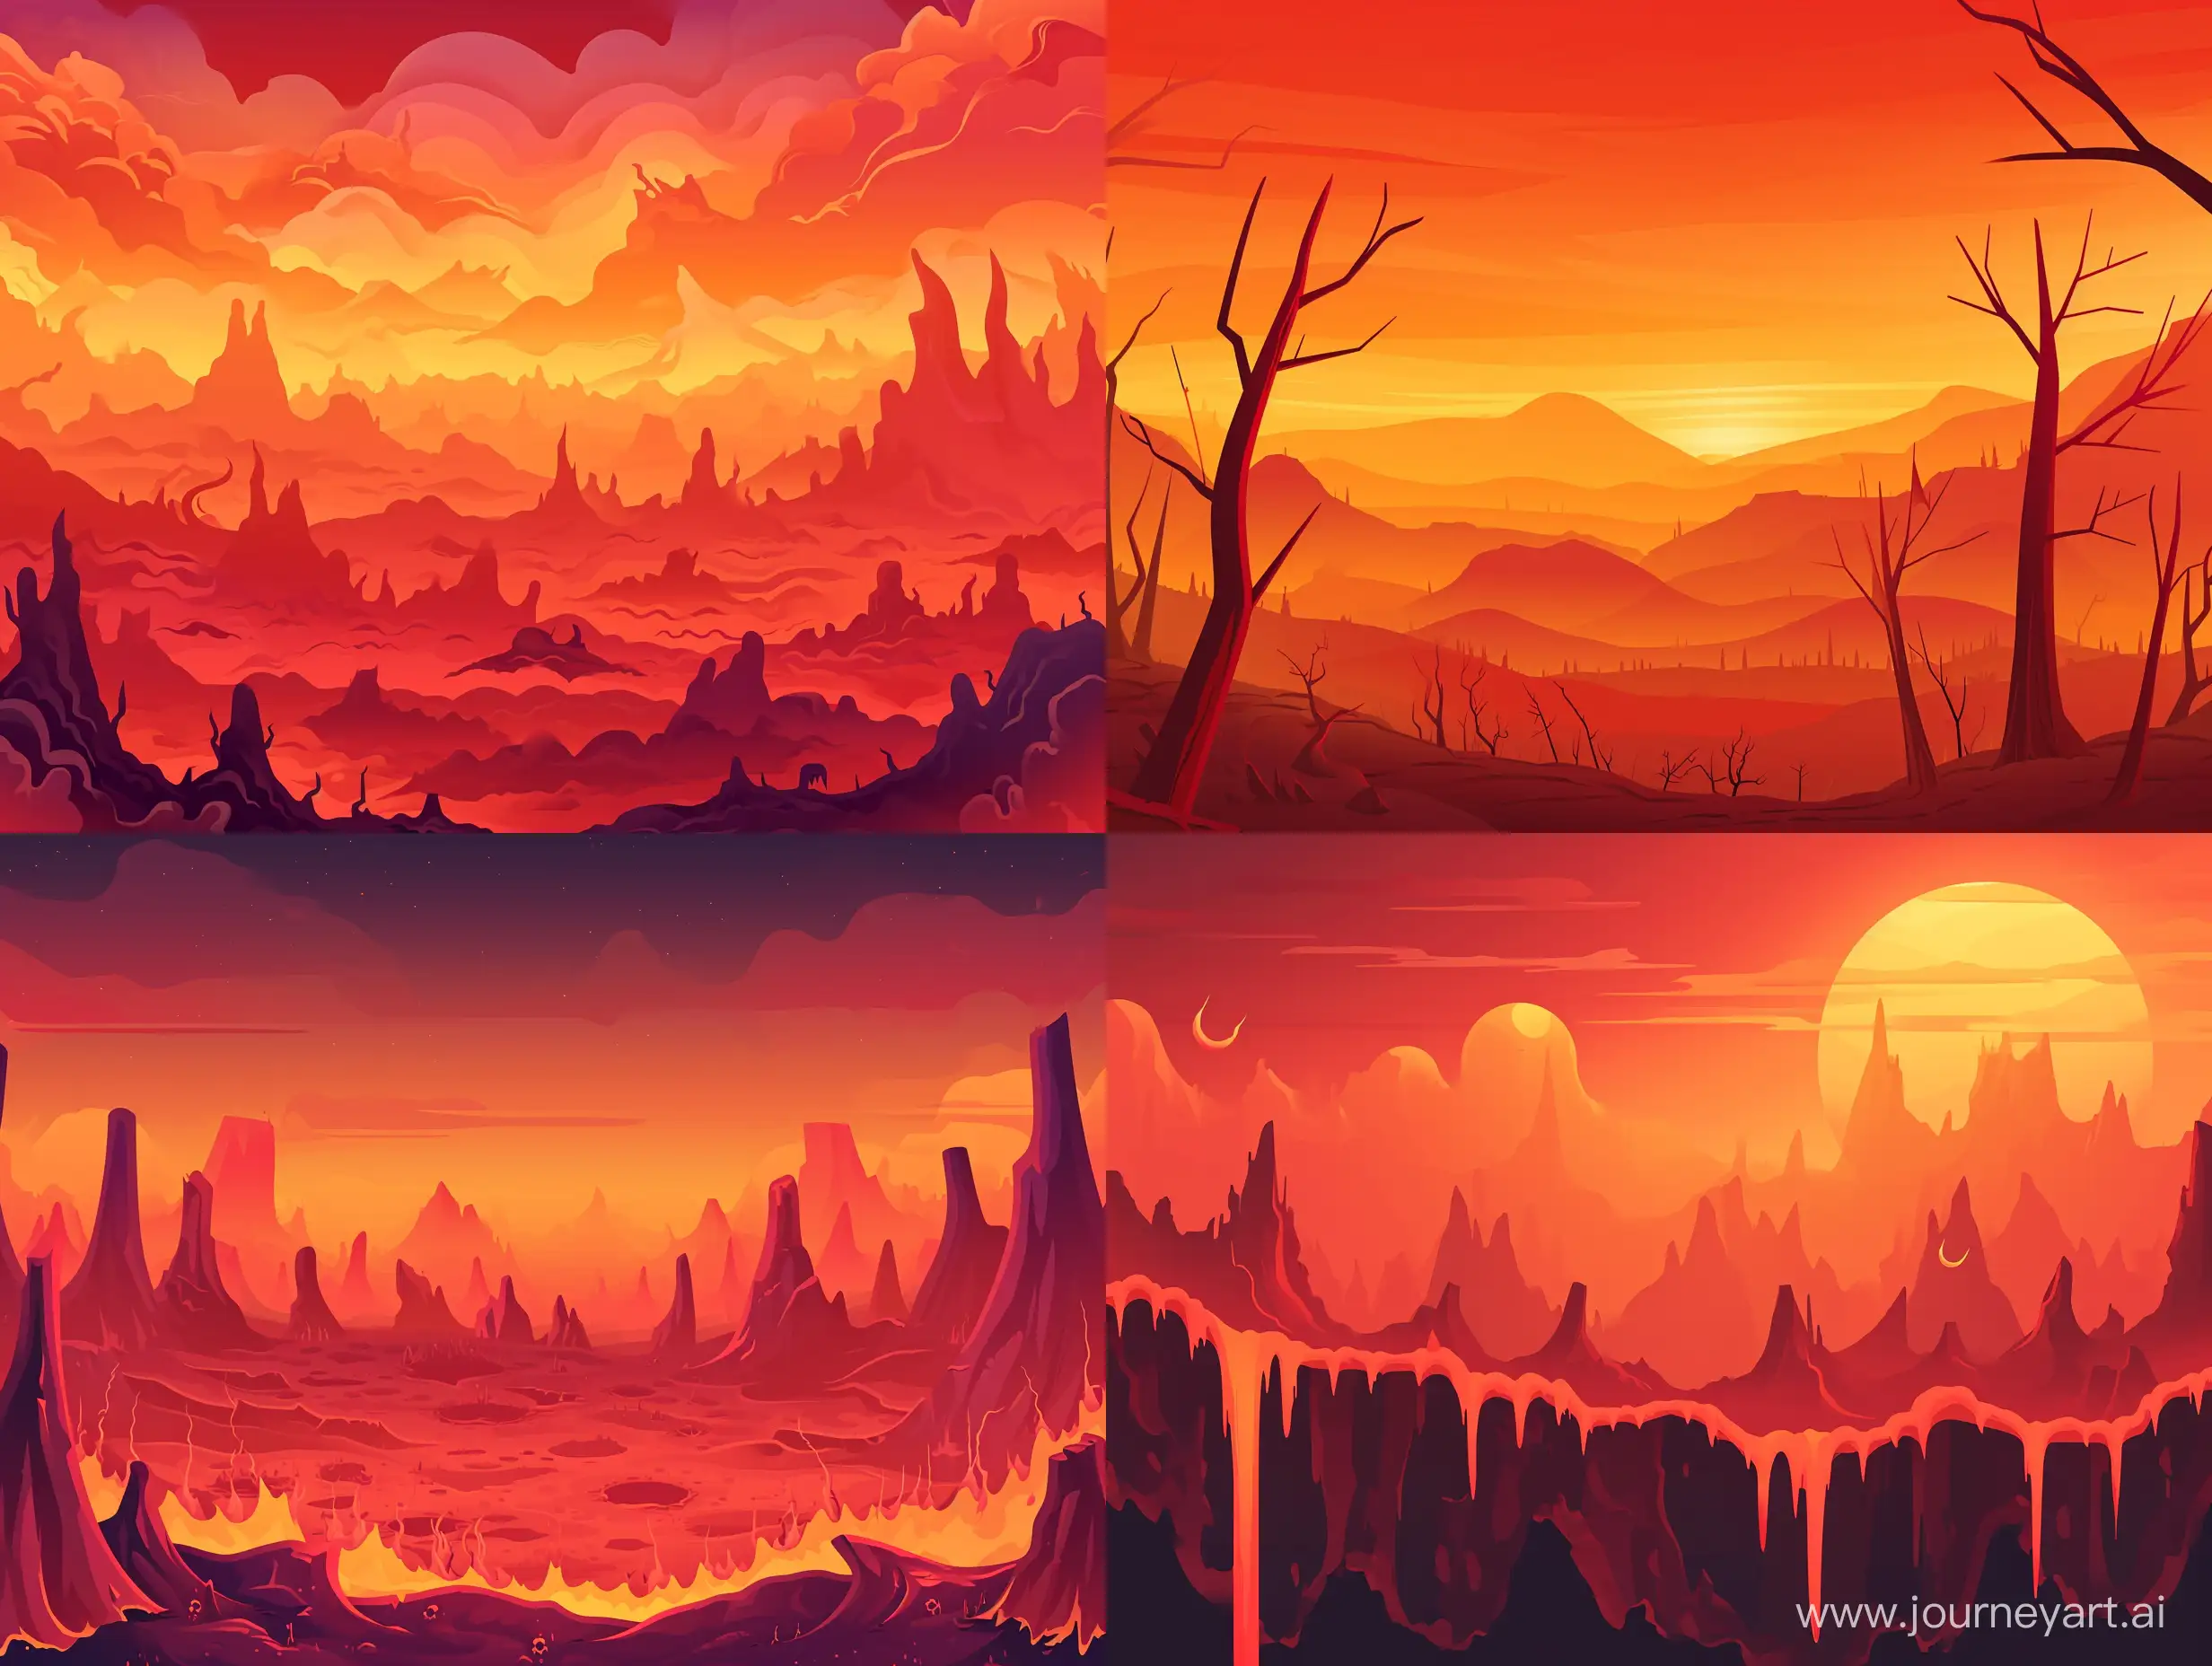 Apocalyptic-Hell-Landscape-in-Striking-OrangeRed-Cartoon-Style